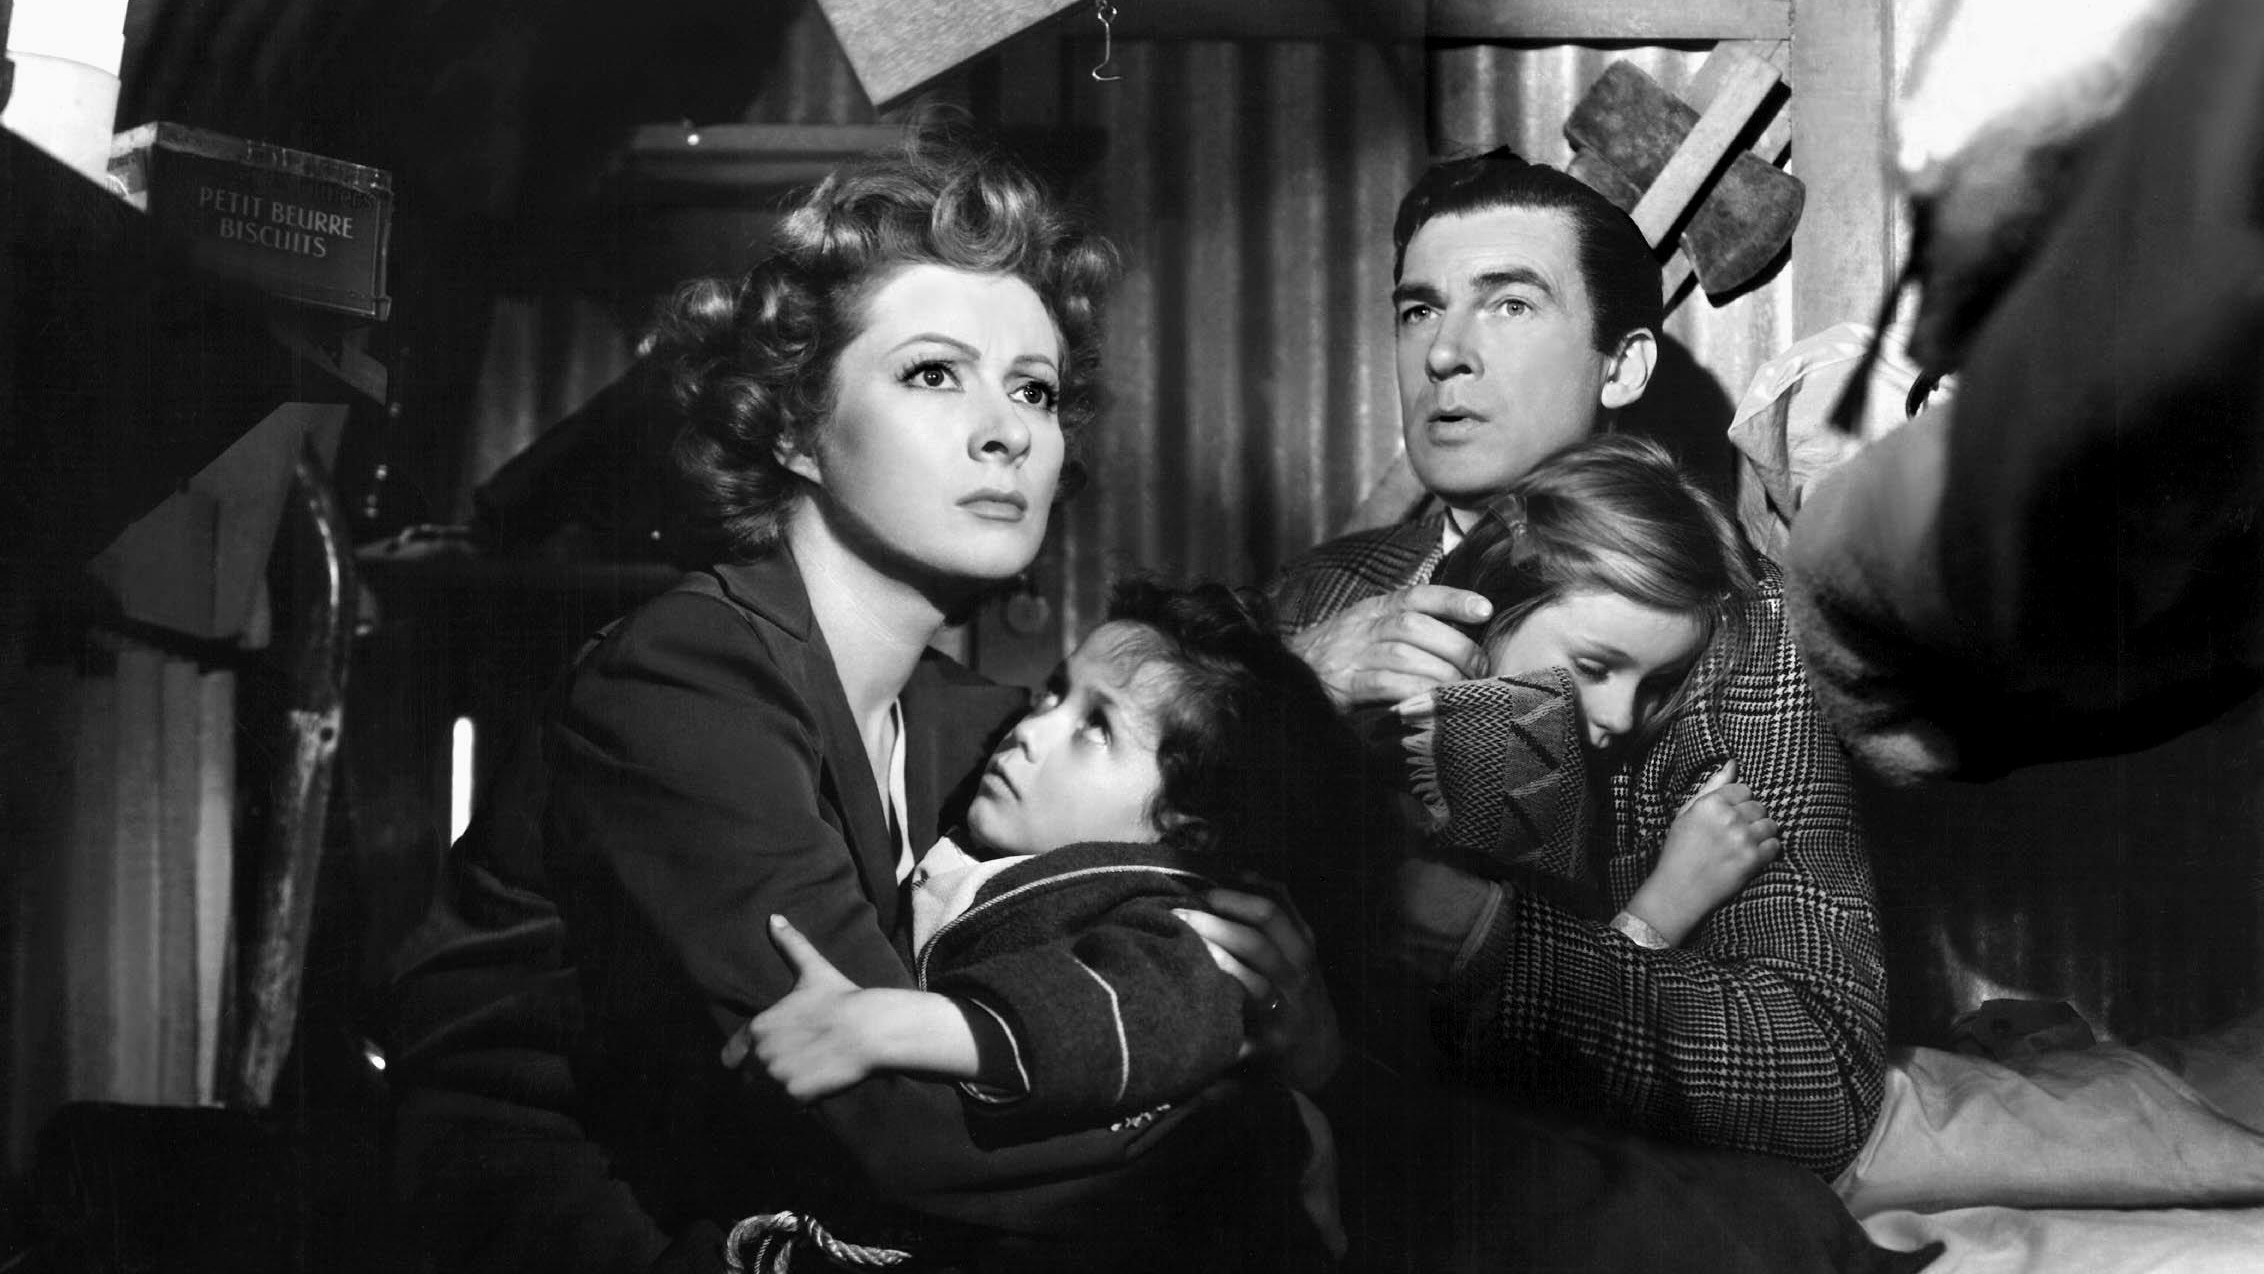 Greer Garson, Christopher Severn, Clare Sanders and Walter Pidgeon in Mrs. Miniver